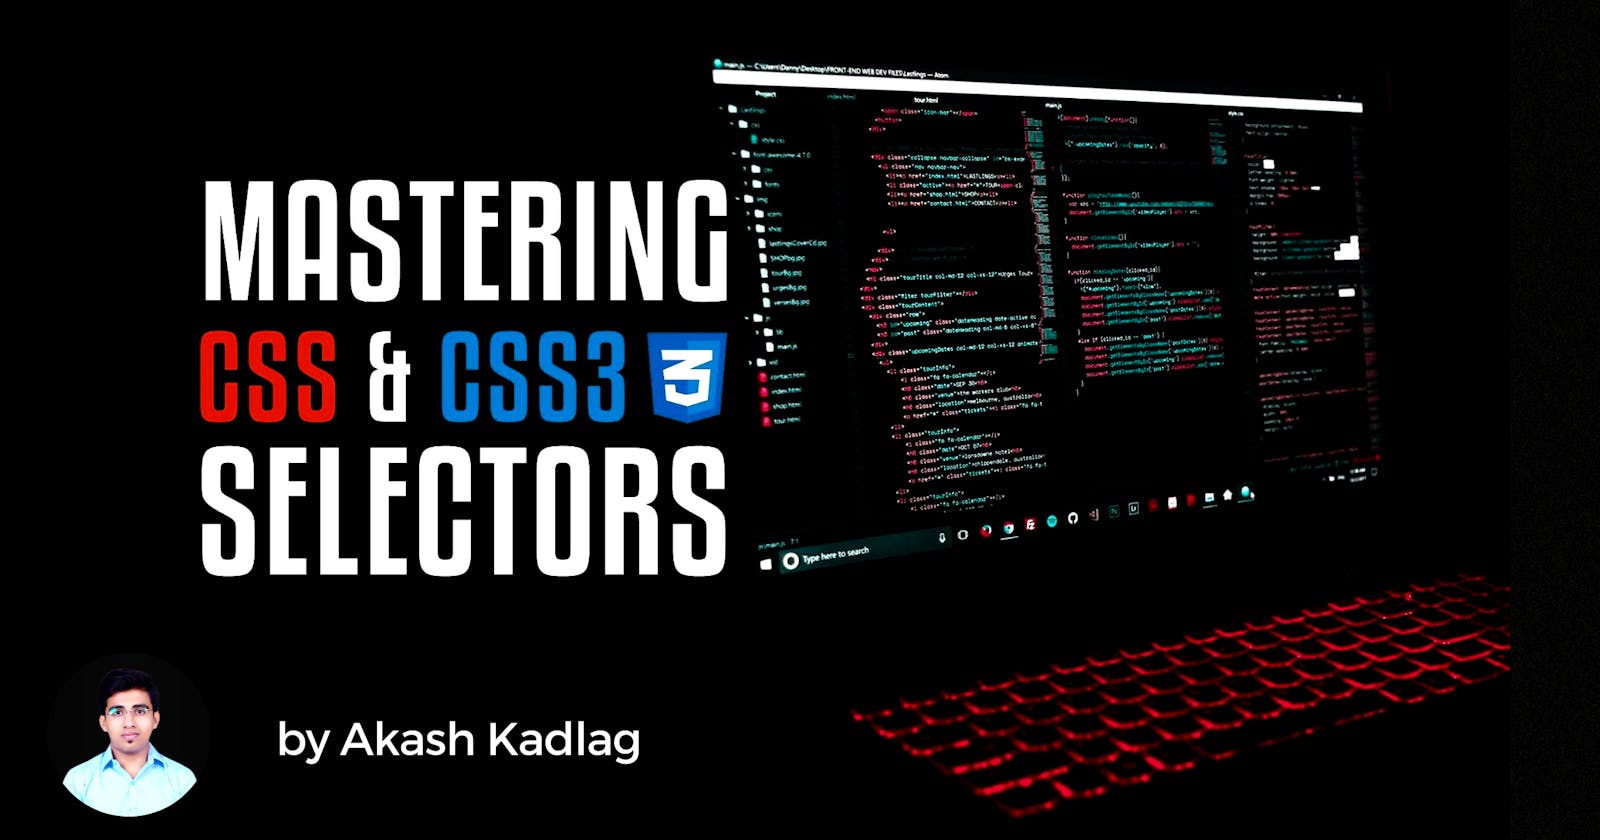 Mastering CSS & CSS3 Selectors in 2022.